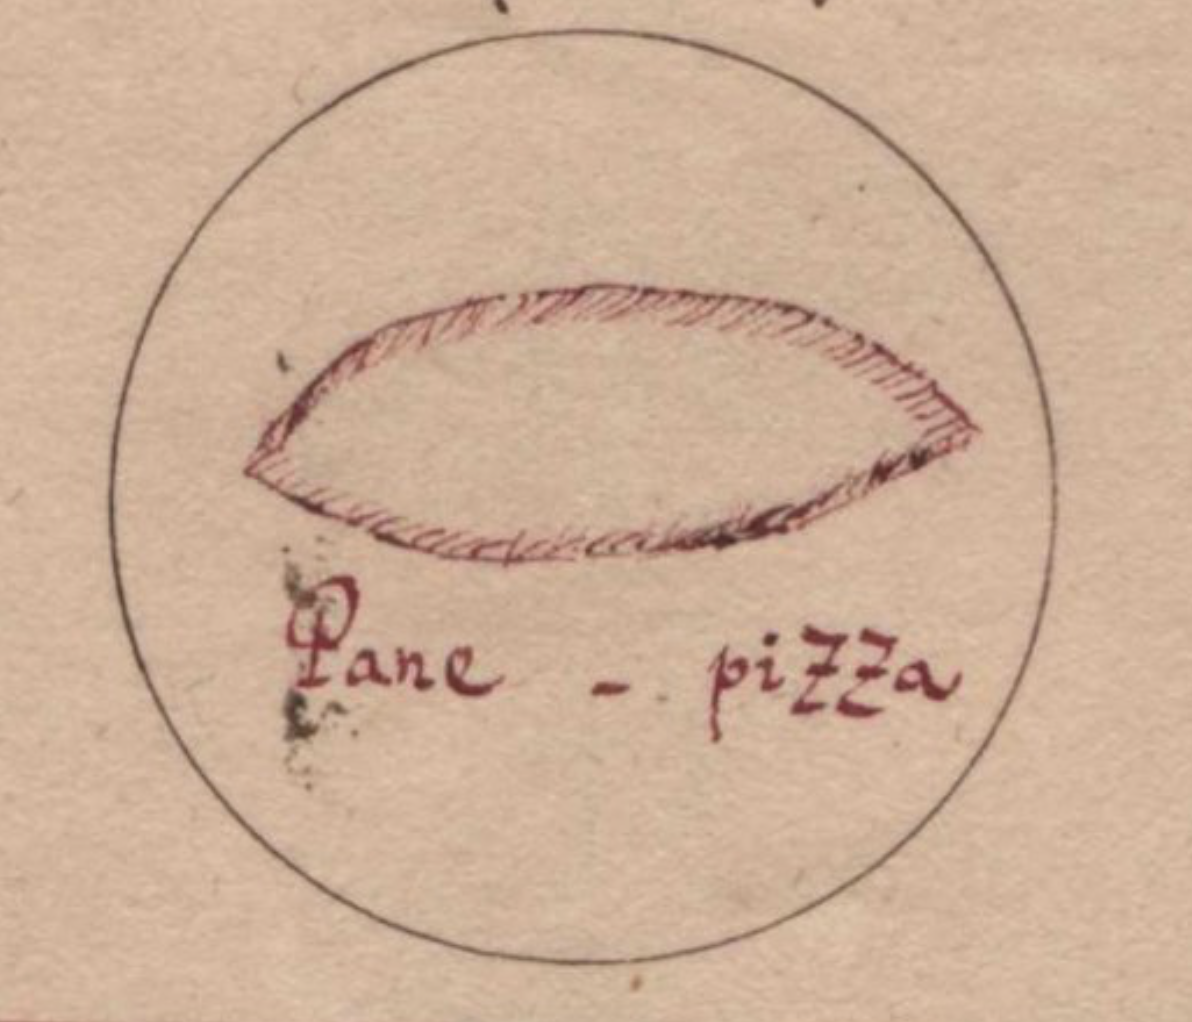 The magical recipe explains that once it is baked, one is to engrave a circular drawing onto a piece of wood, taken from the gallows, which includes the words ‘Pane—pizza’ 6/